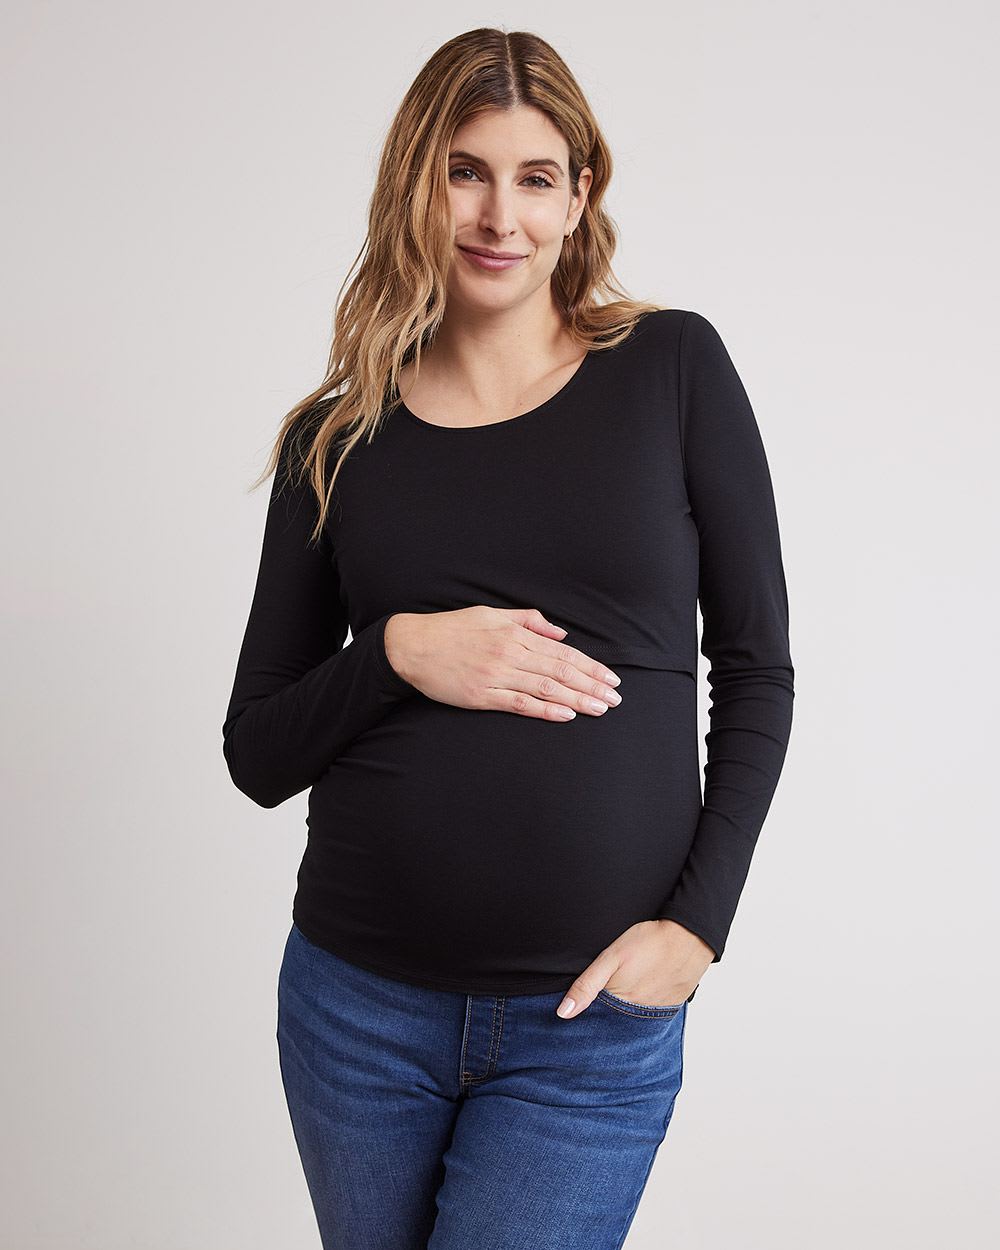 Nursing Long-Sleeve Top with Scoop Neckline, Set of 2 - Thyme Maternity